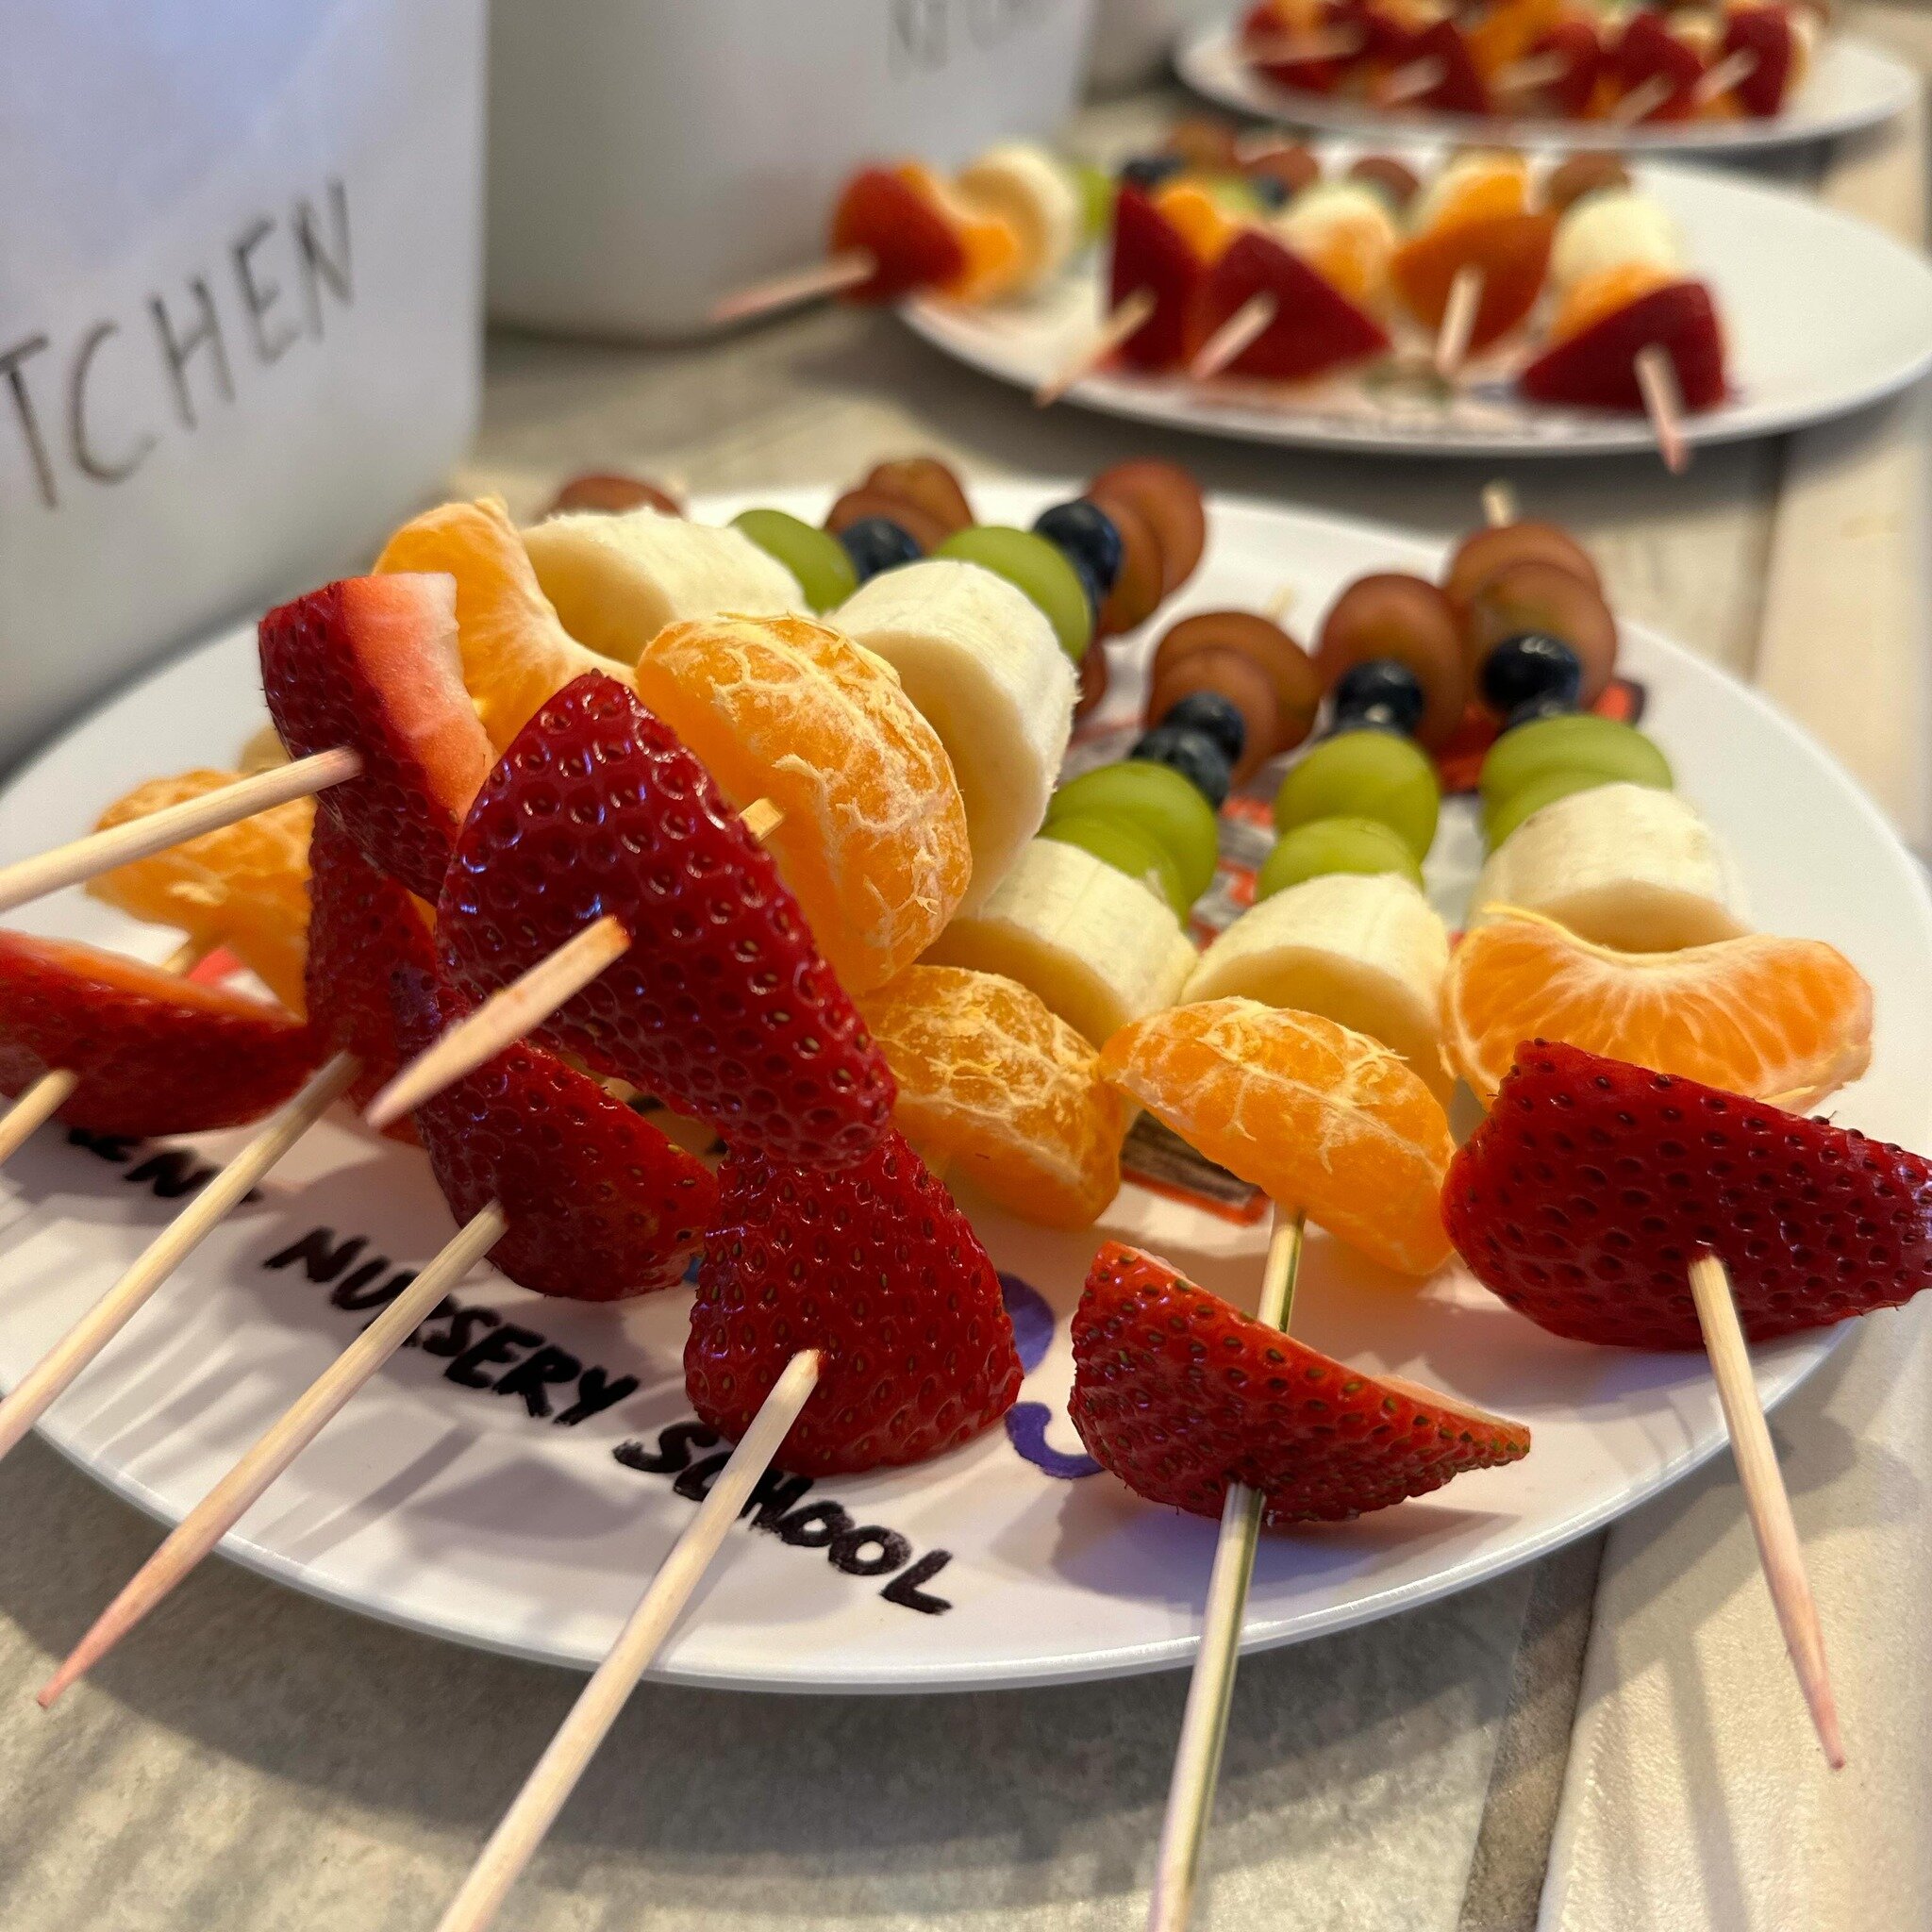 🌈 Taste the rainbow with us! Today at snack time, we indulged in colorful rainbow kabobs, each skewer bursting with vibrant fruits and veggies. 

Eating the rainbow isn&rsquo;t just delicious&mdash;it&rsquo;s a fun and healthy way to ensure we get a